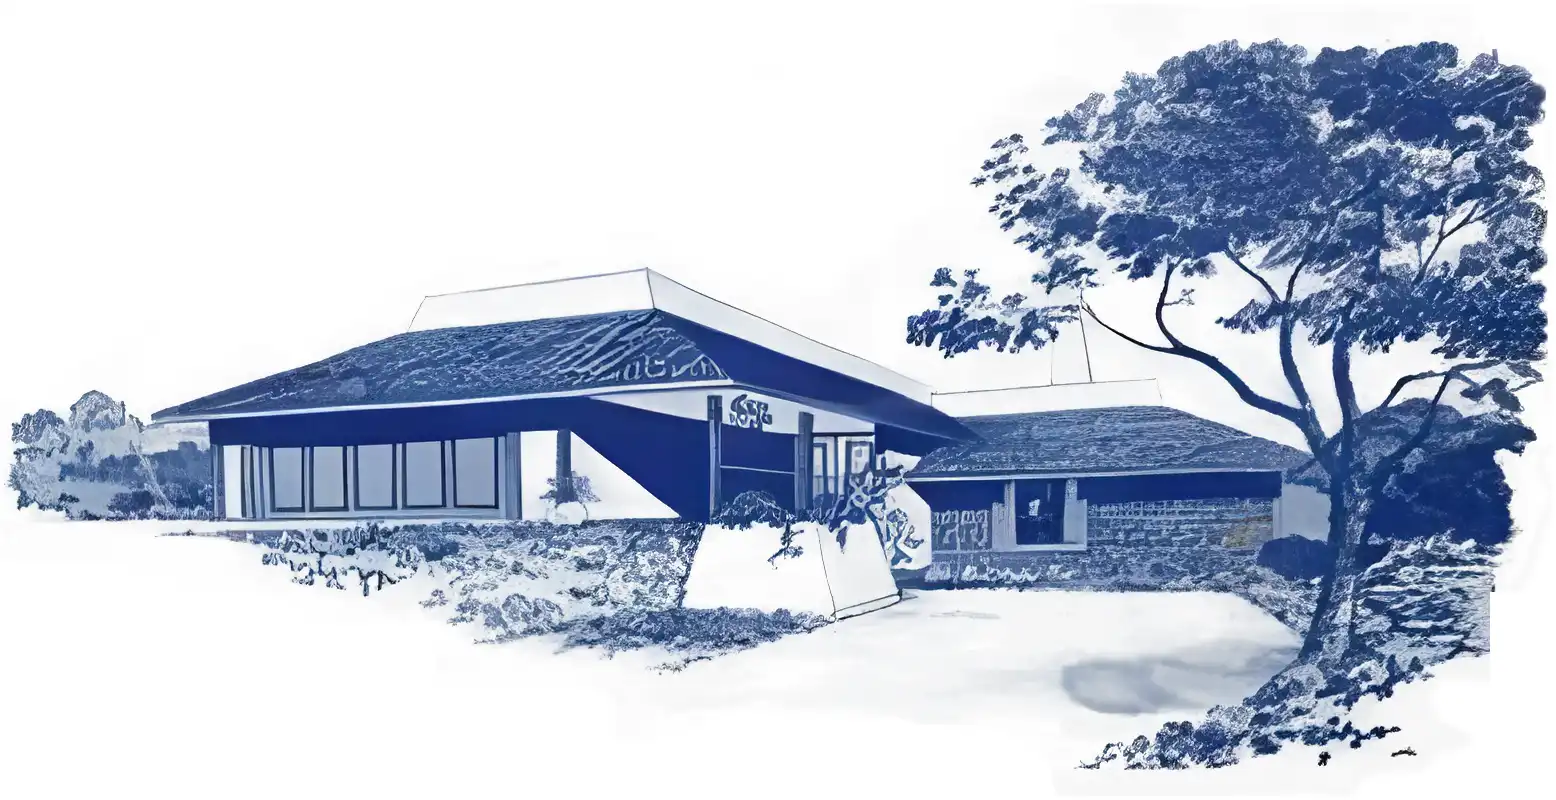 Monochrome rendering of 1960s split level ranch style house, variant with flat topped dutch gable roofs.